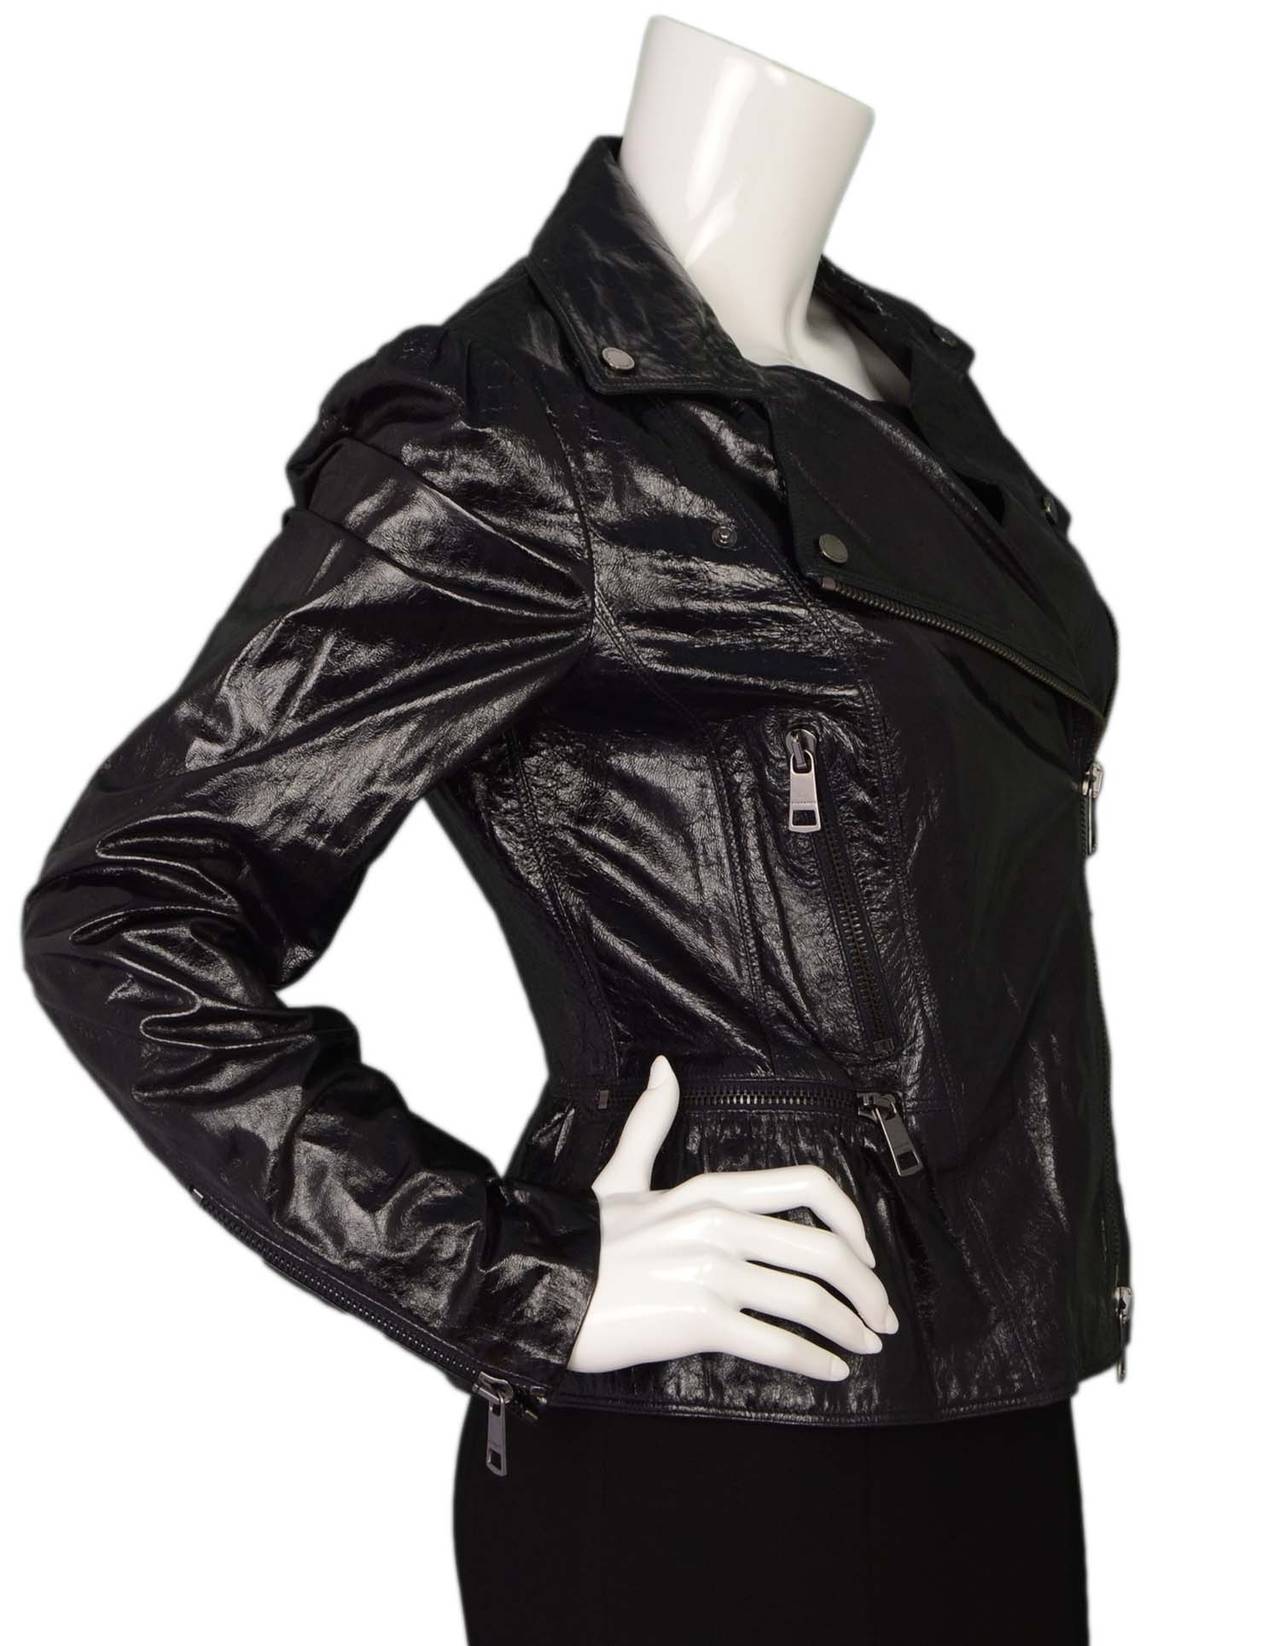 Burberry Black Patent Motorcyle Jacket
Features ruffle at hemline
Made in: Italy
Color: Black
Composition: 100% lambskin
Lining: Blue and black plaid, 40% cupro, 60% acetate
Closure/opening: Diagonal zip up front
Exterior Pockets: Three